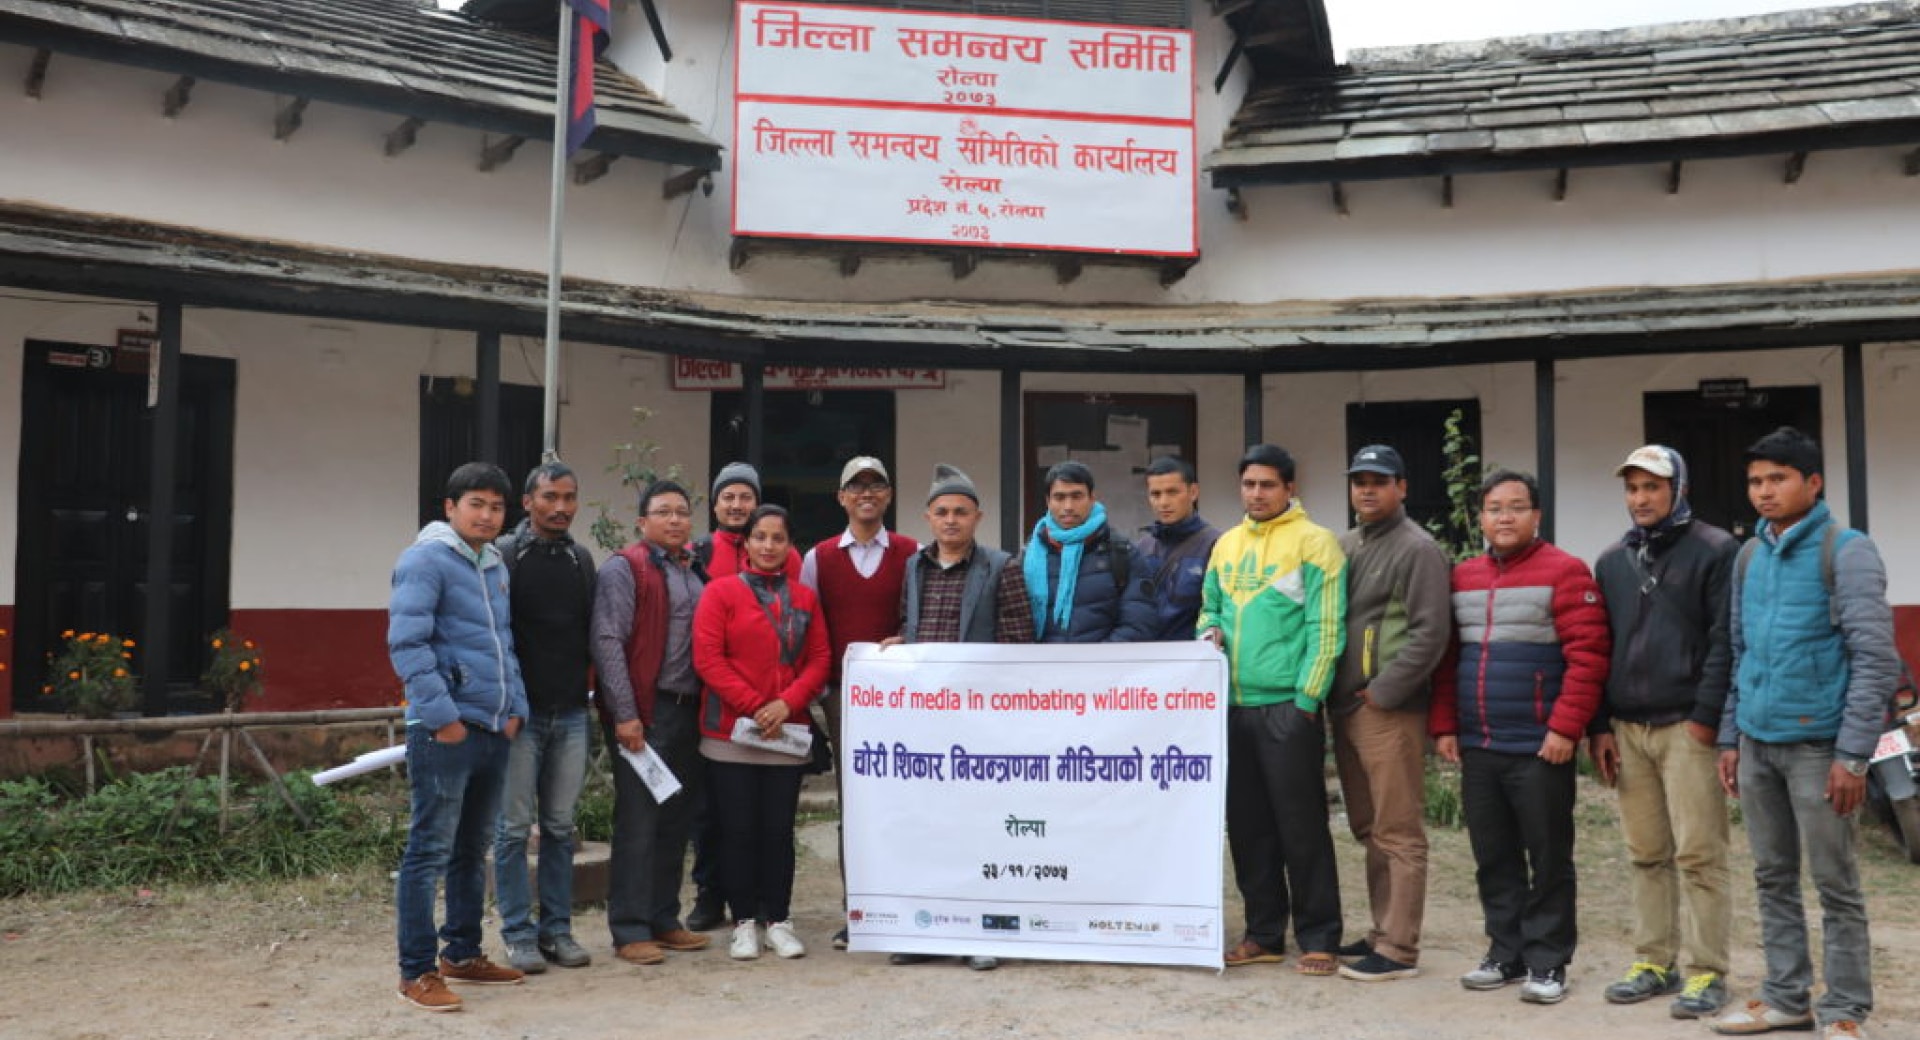 Rolpa: A Future Hub for Ecotourism and Red Panda Conservation